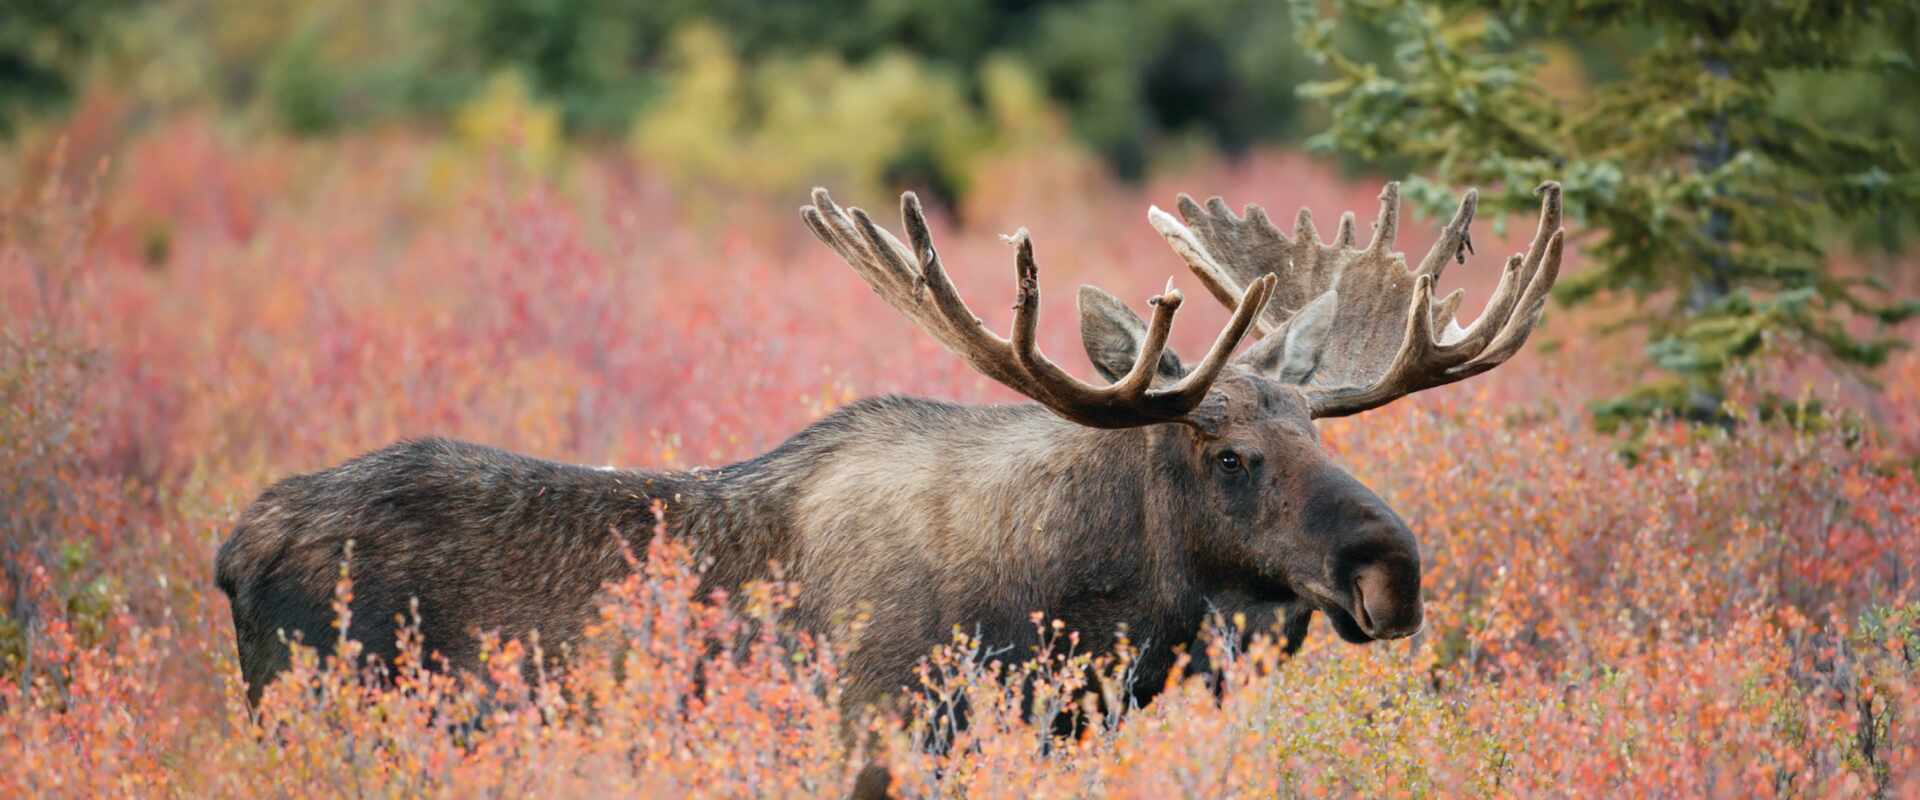 Moose in field of red plants, Canada